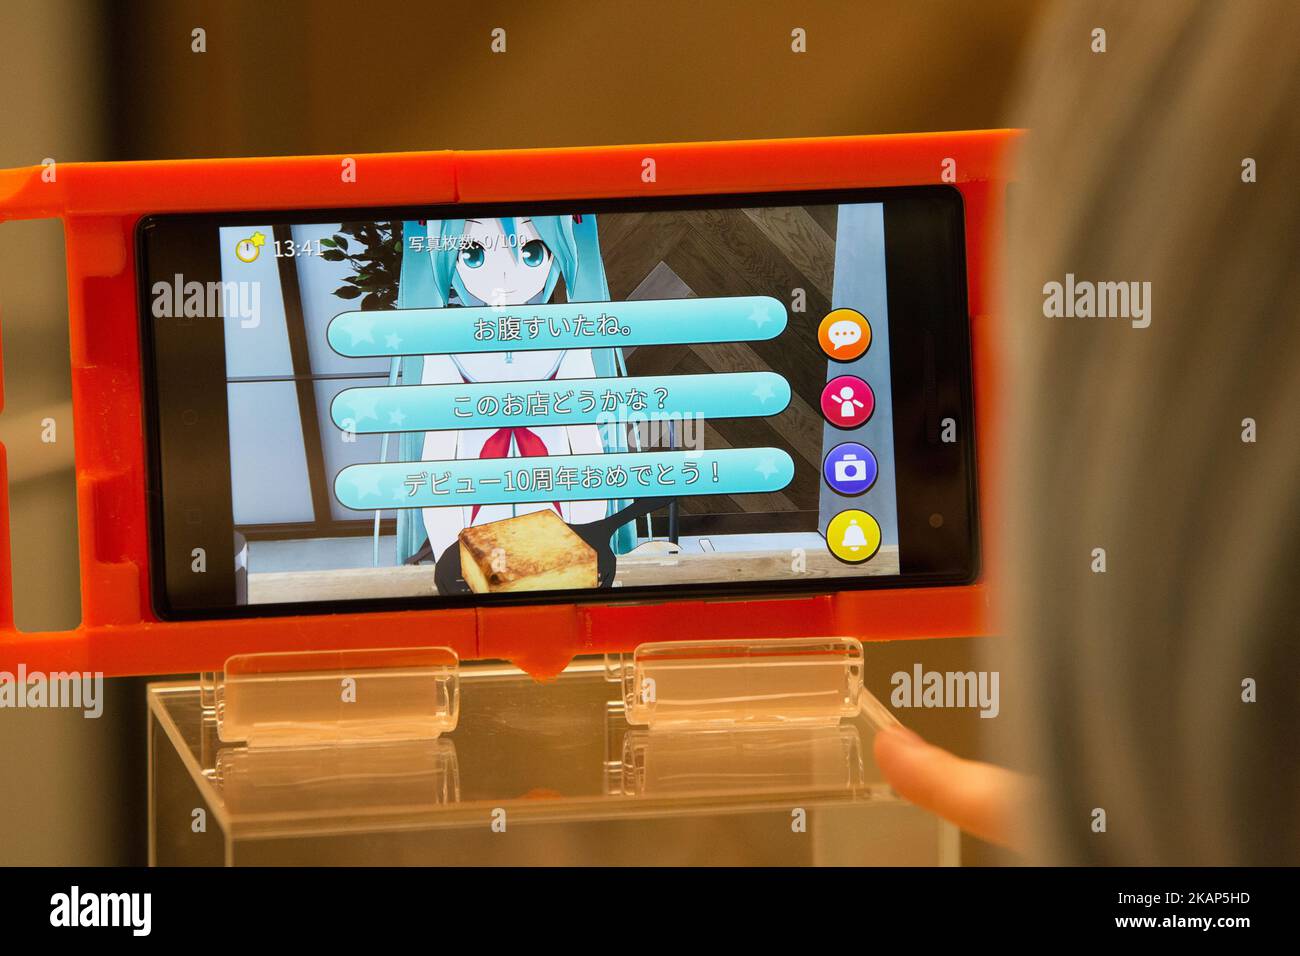 SENDAI, JAPAN - JULY 8: Anime fan looking at menu of a smart phone equipped with augmented reality (AR) application enjoying his virtual idol Hatsune Miku while having some sweets during an event in Sendai, Japan on July 8, 2017. As part of a promotion with telecommunications provider au/KDDI, Crypton Future Media and Blue Leaf Cafe operator, guest can enjoy dining with a special menu with their Vocaloid superstarIdol Hatsune Miku several days. (Photo by Richard Atrero de Guzman/NUR Photo) (Photo by Richard Atrero de Guzman/NurPhoto) *** Please Use Credit from Credit Field *** Stock Photo